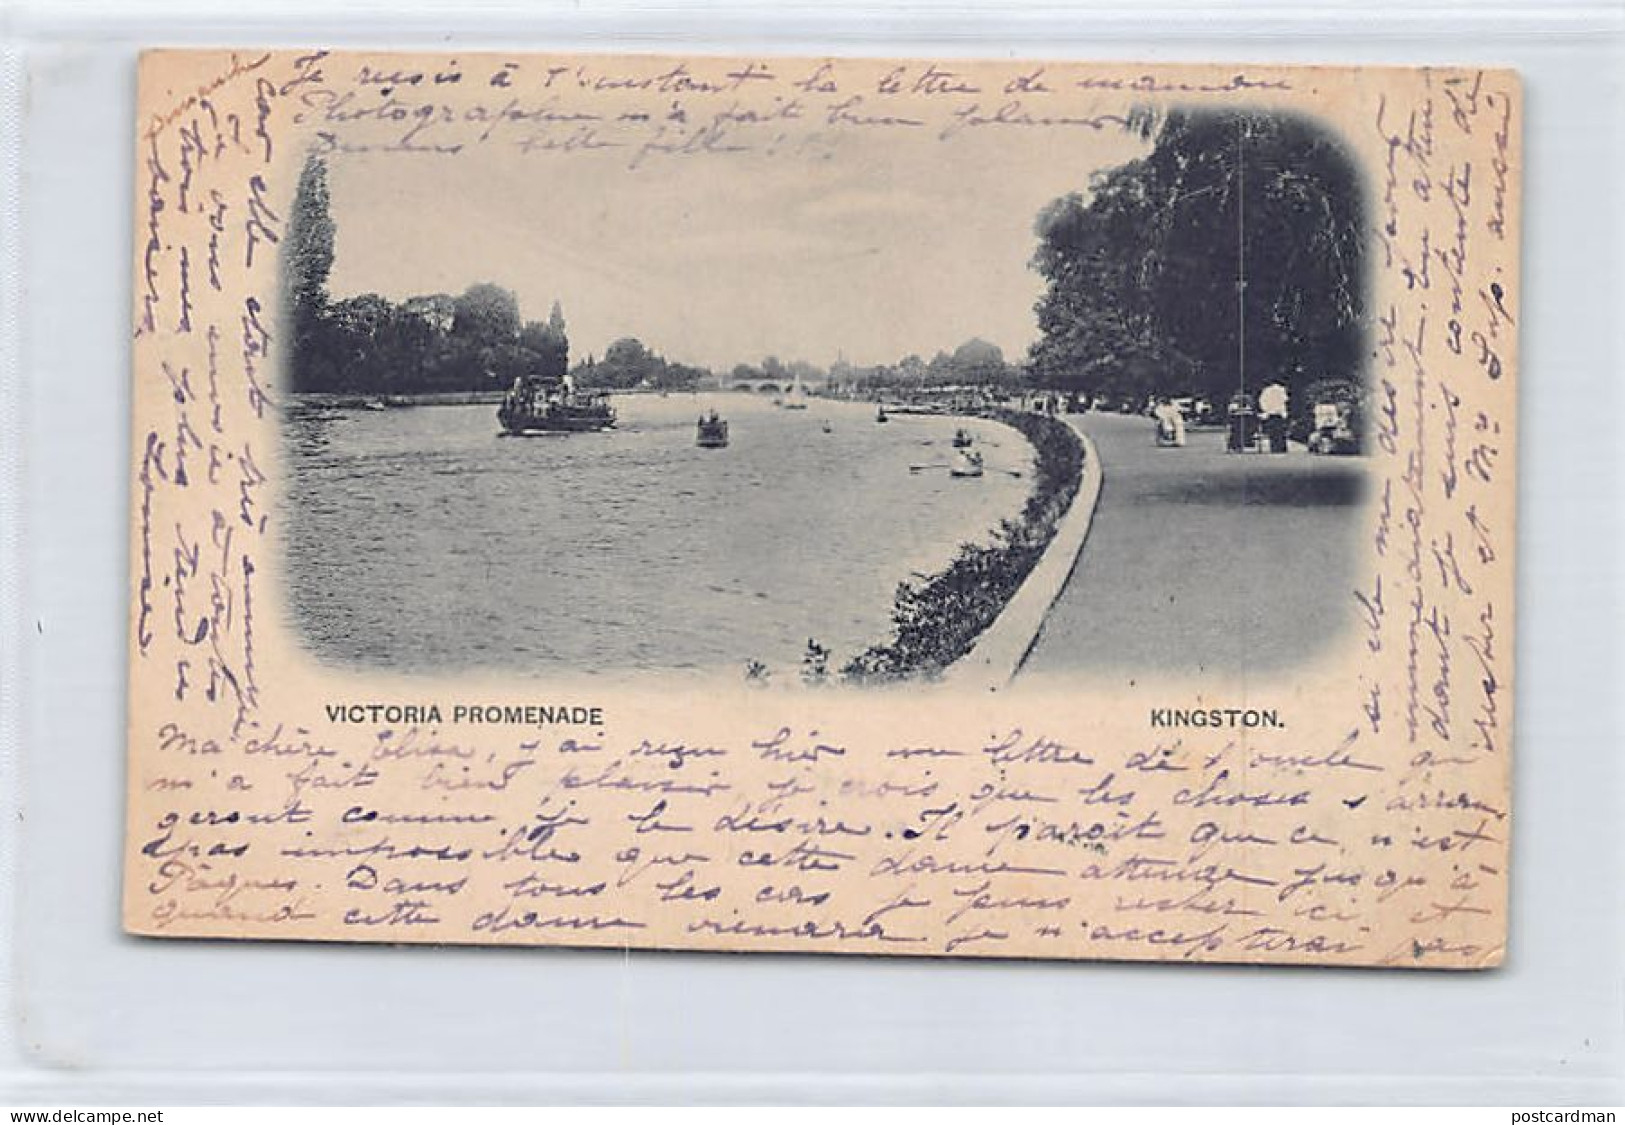 KINGSTON UPON THAMES (Greater London) Victoria Promenade - Year 1899 - Forerunner Small Size Postcard - SEE SCANS FOR CO - Londres – Suburbios